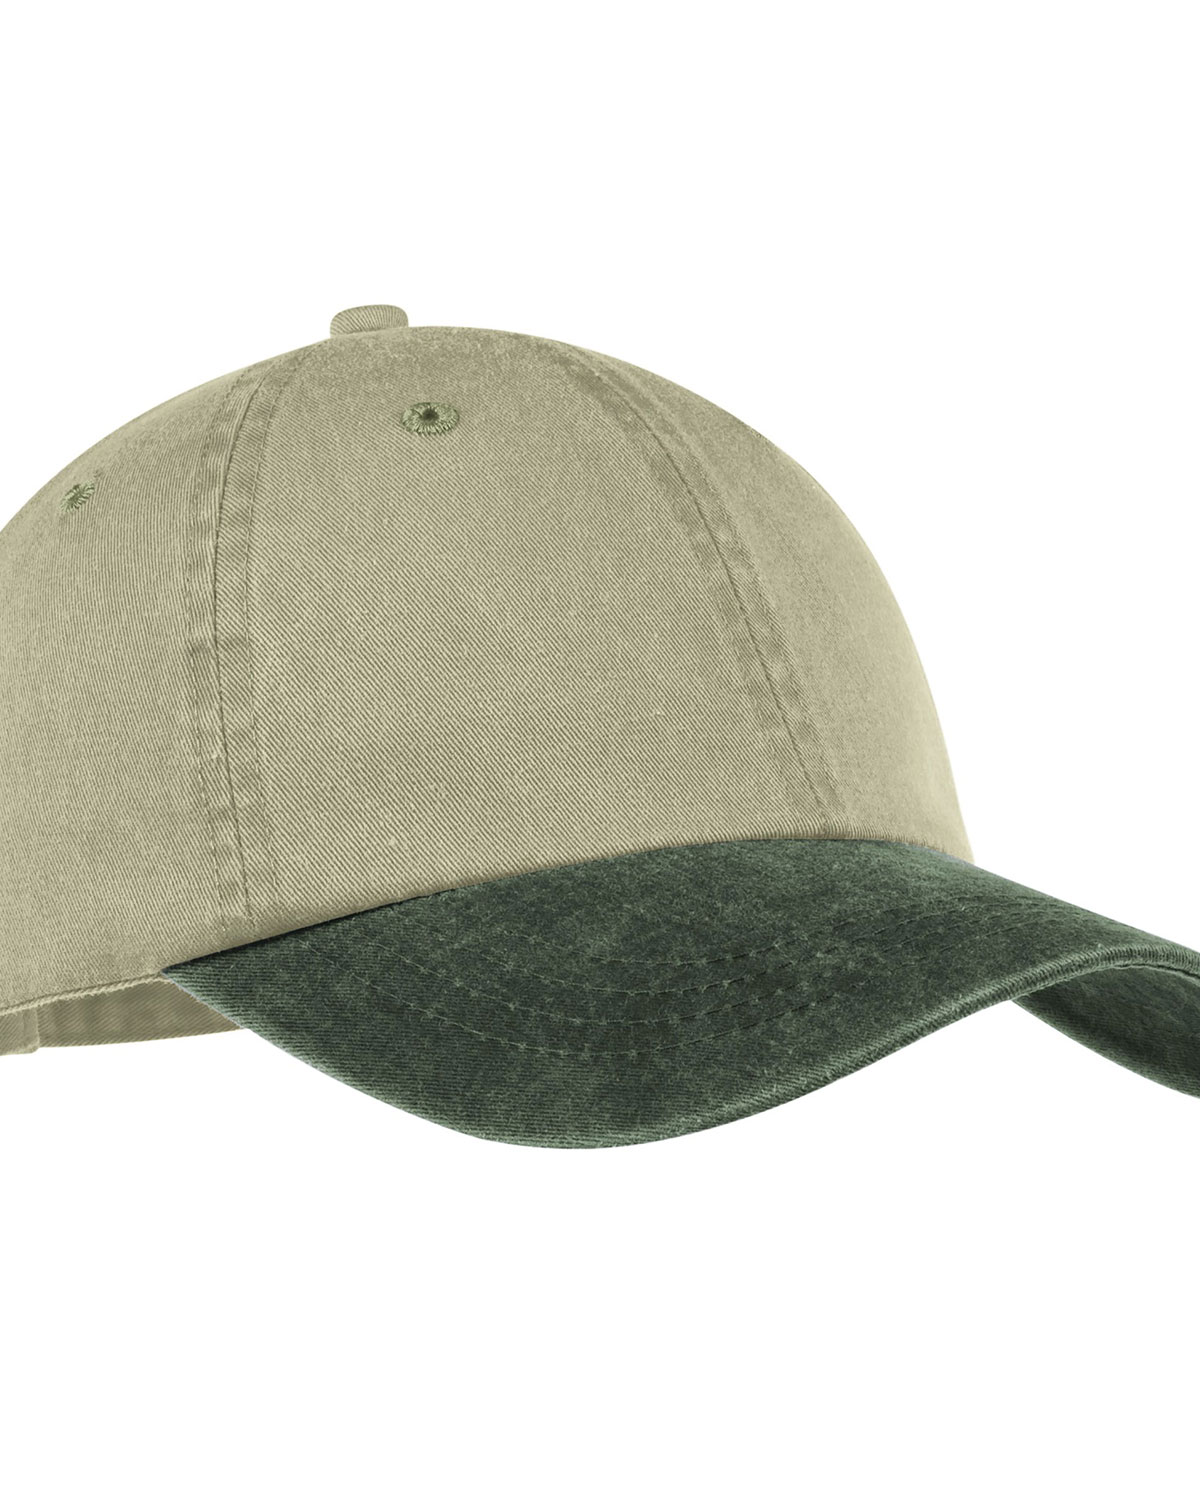 Port & Company CP83 Men Two-Tone Pigment-Dyed Cap at Apparelstation